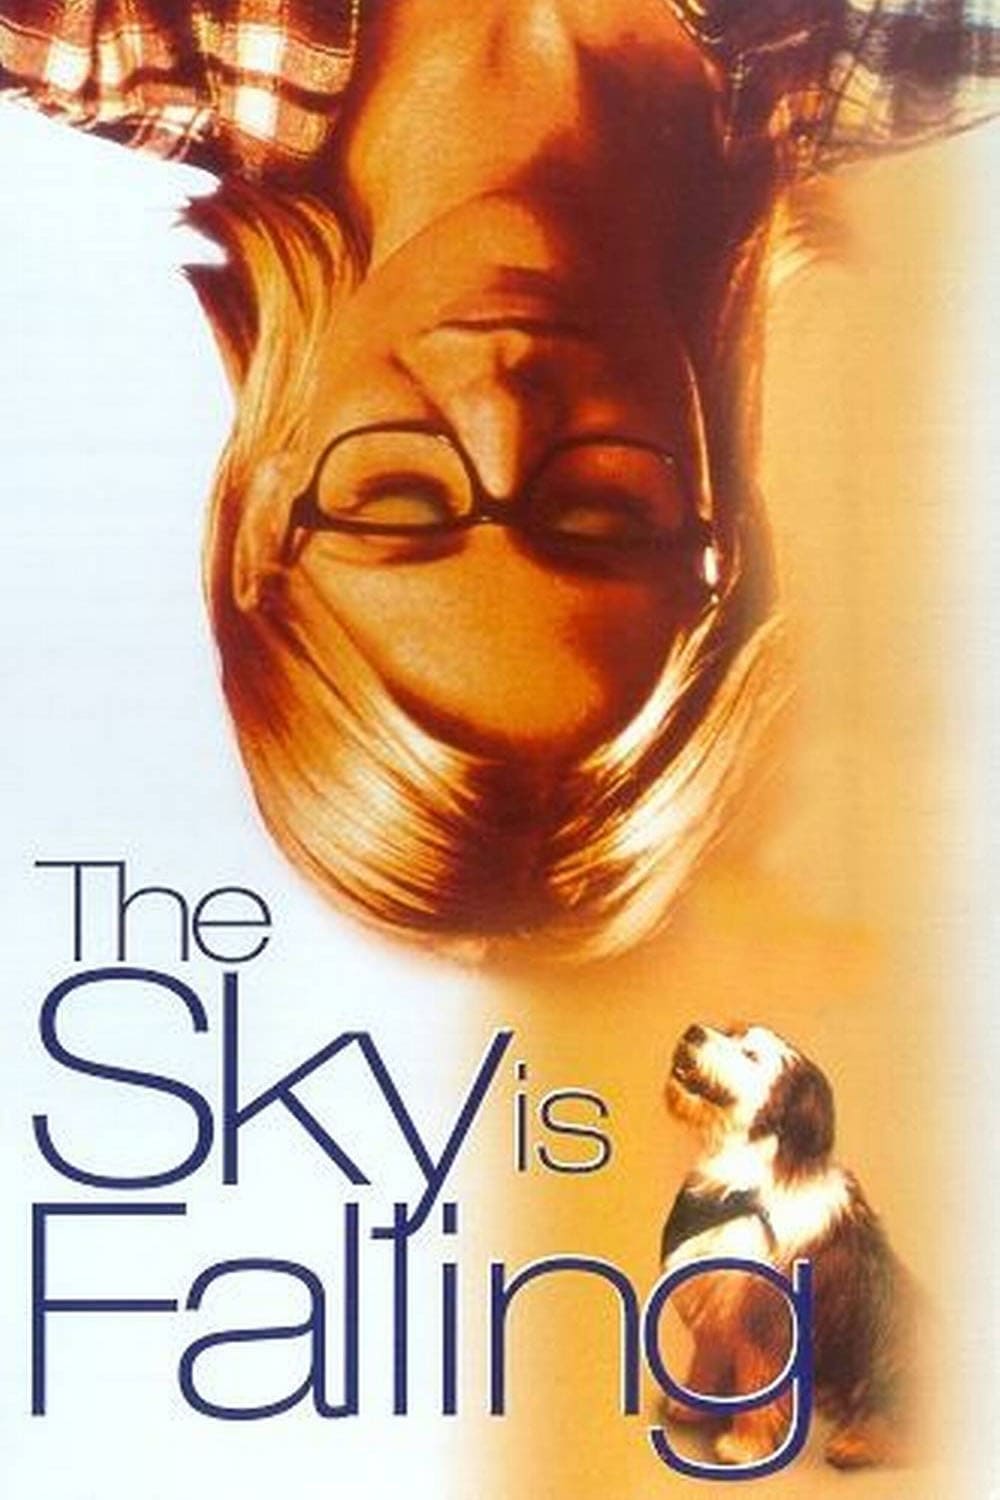 The Sky is Falling (2001)